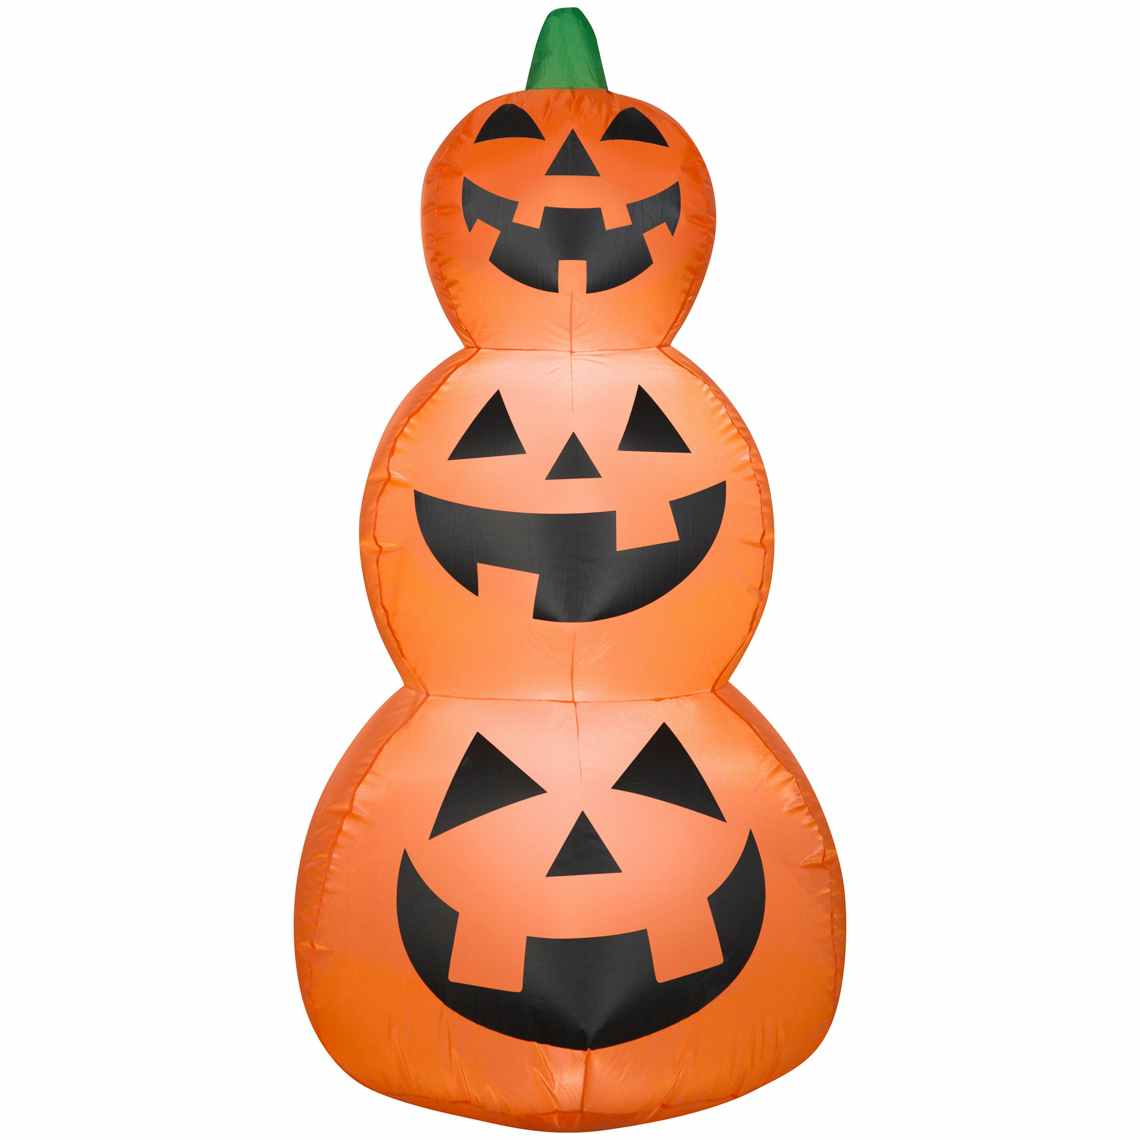 stock photo of inflatable pumpkin stack on white backgound